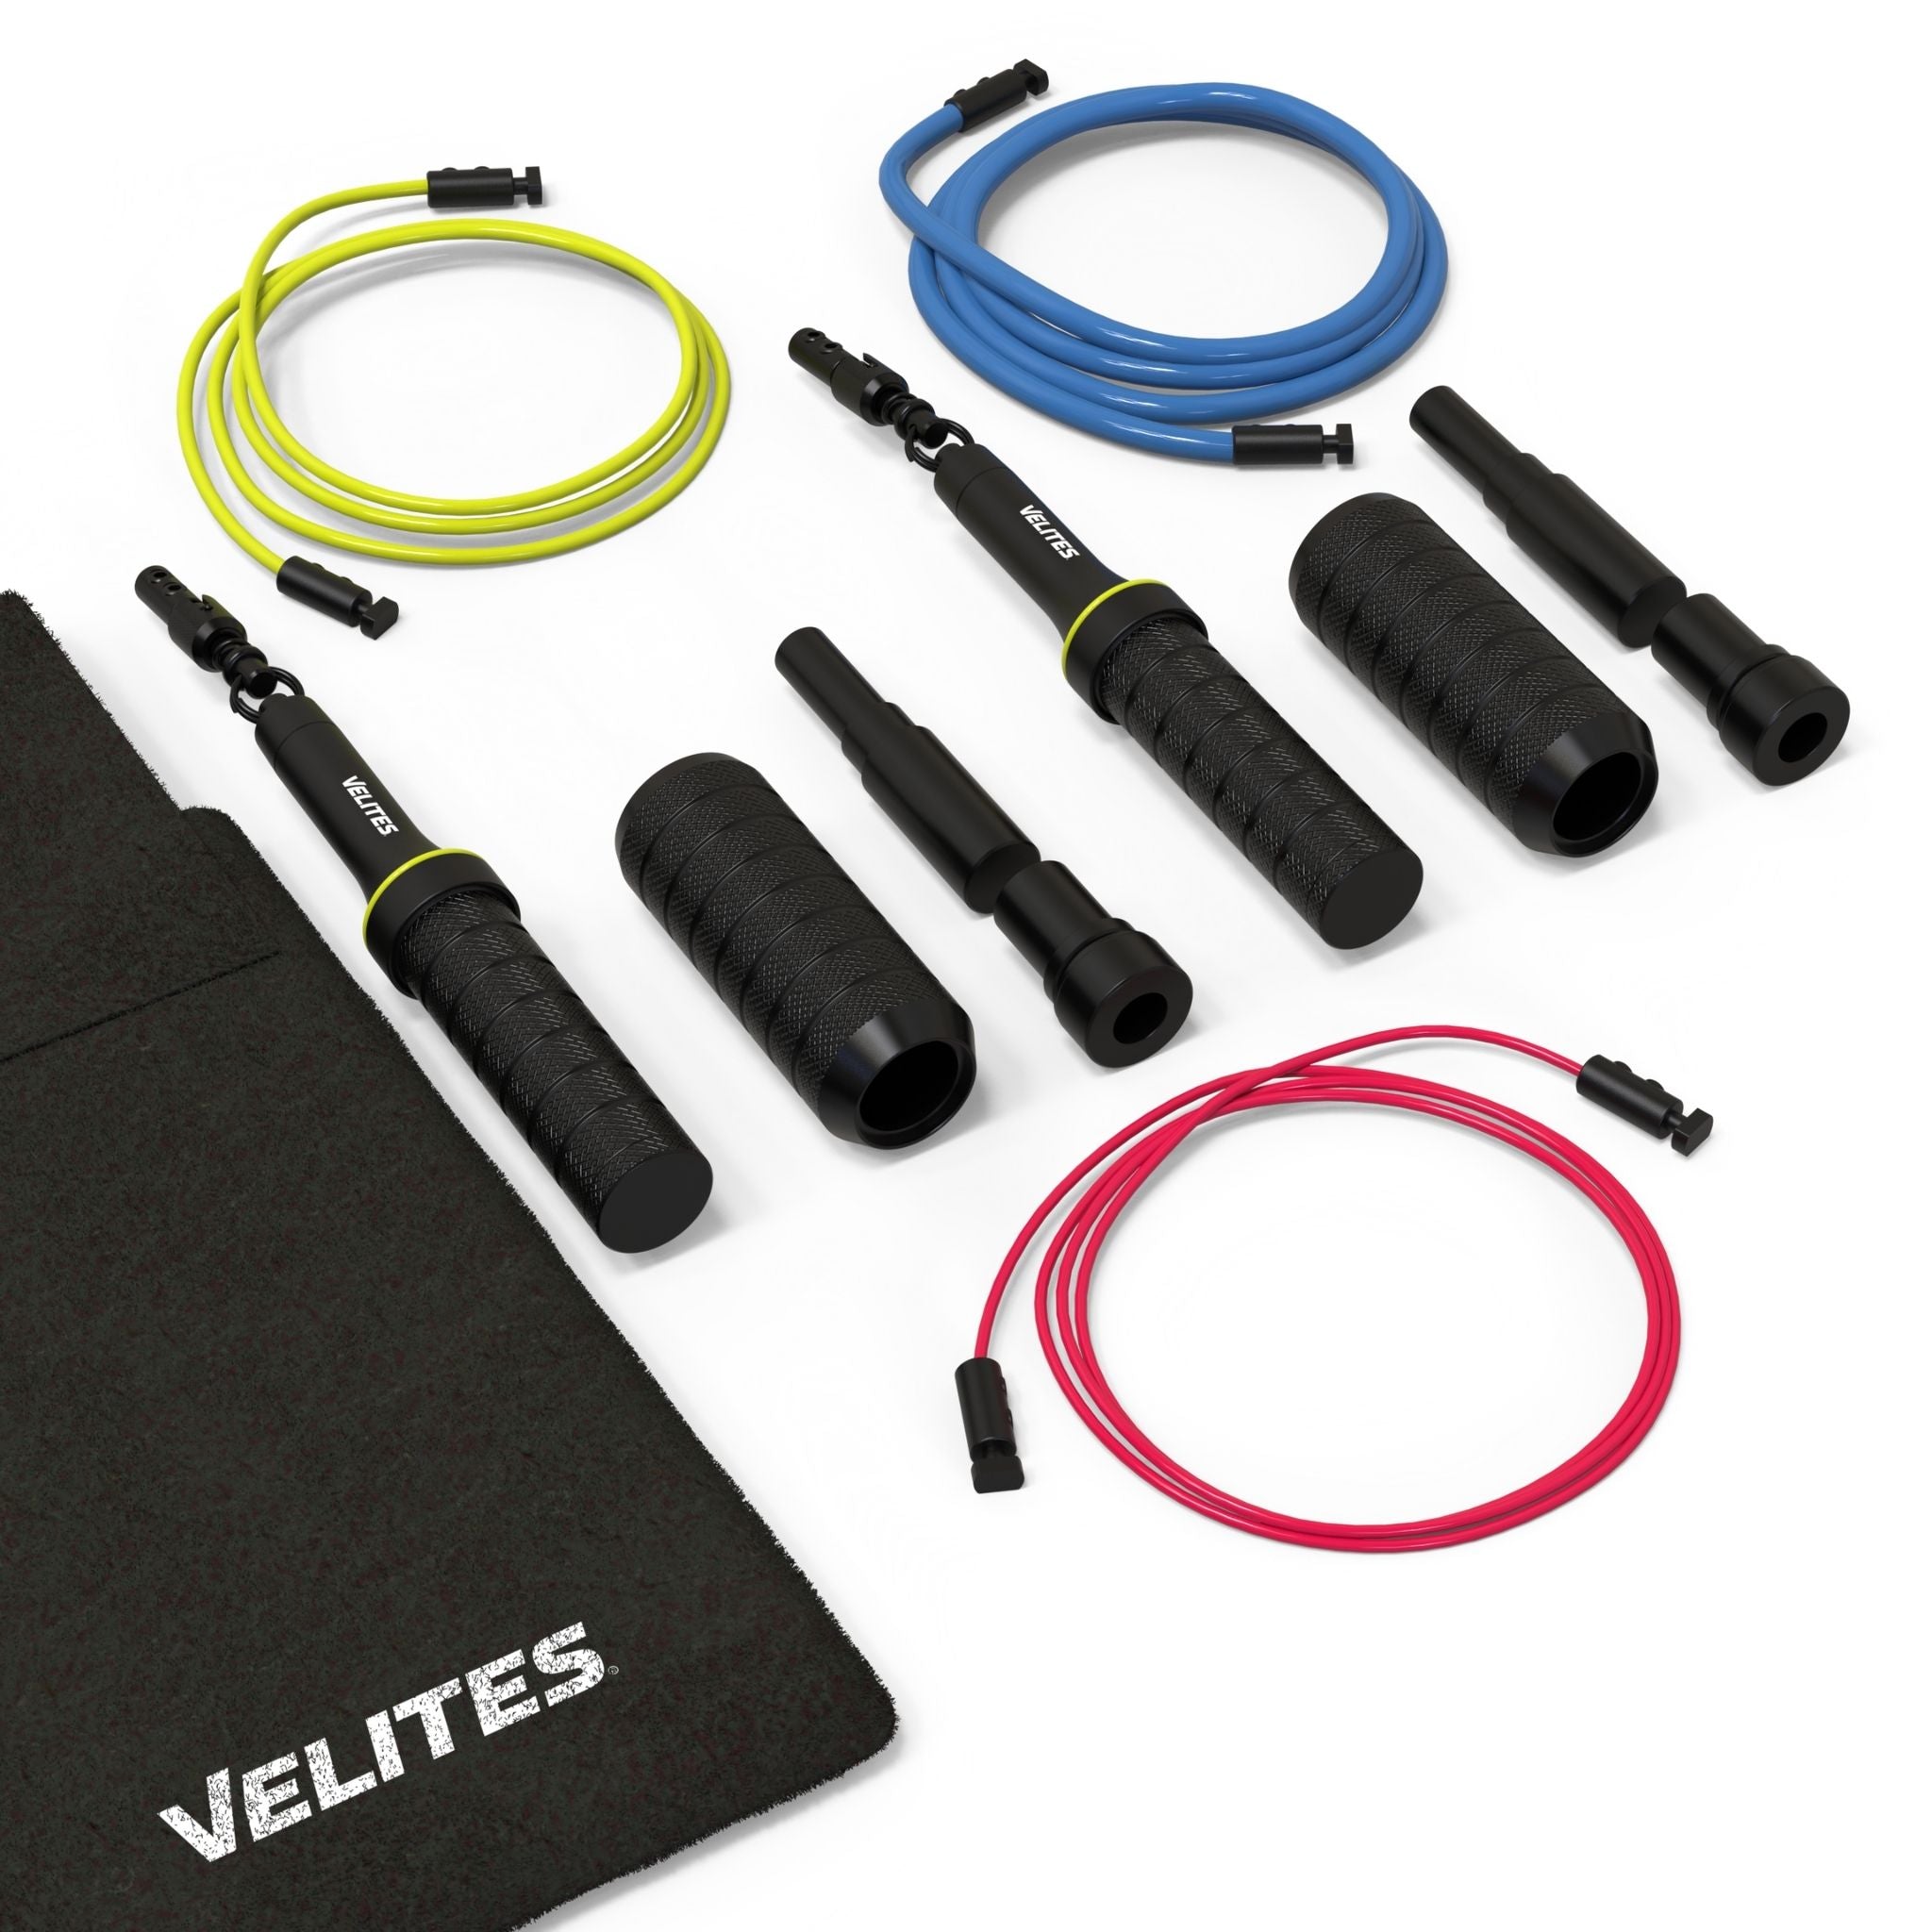 Pack Comba Earth 2.0 Velites + Lastres + Cables - negro - 